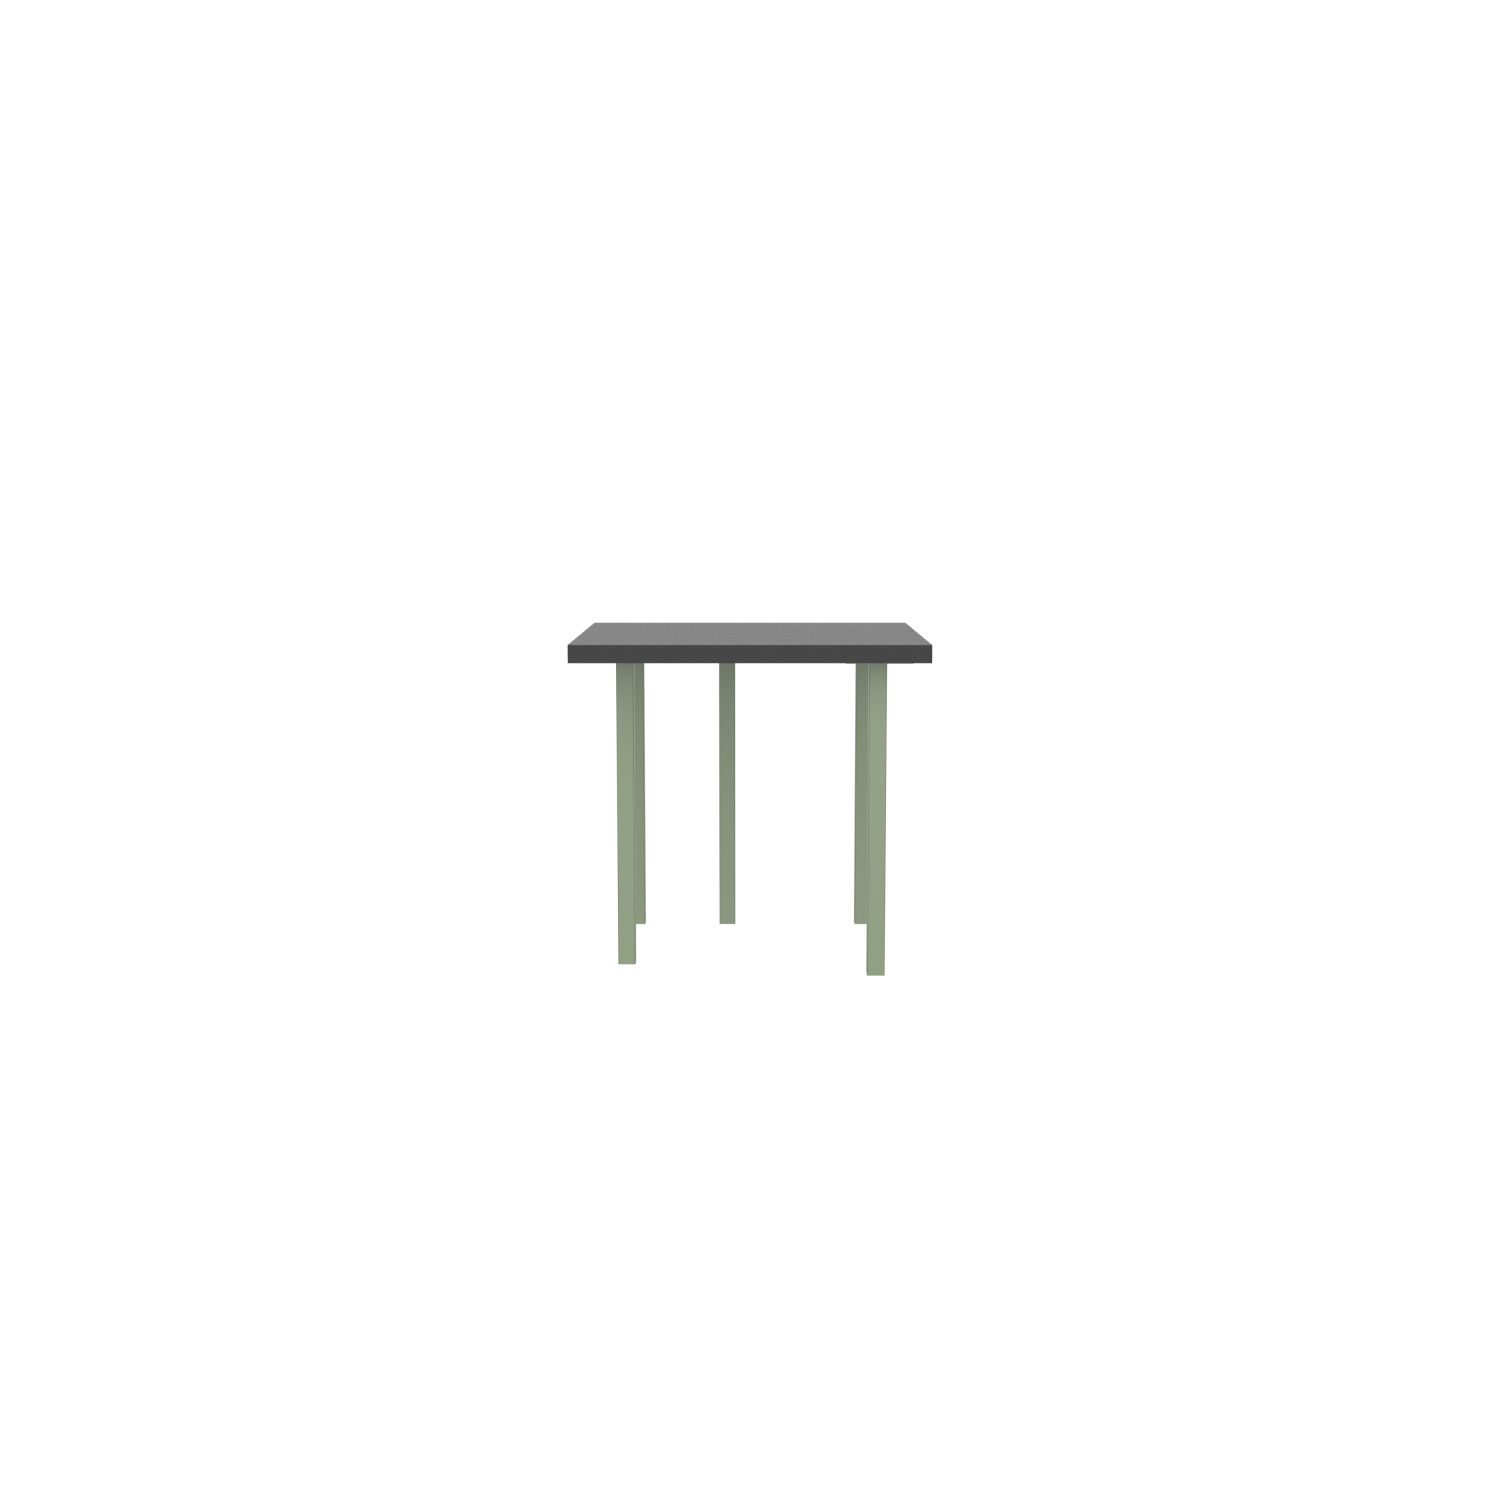 lensvelt bbrand table five fixed heigt 80x80 hpl black 50 mm price level 1 green ral6021